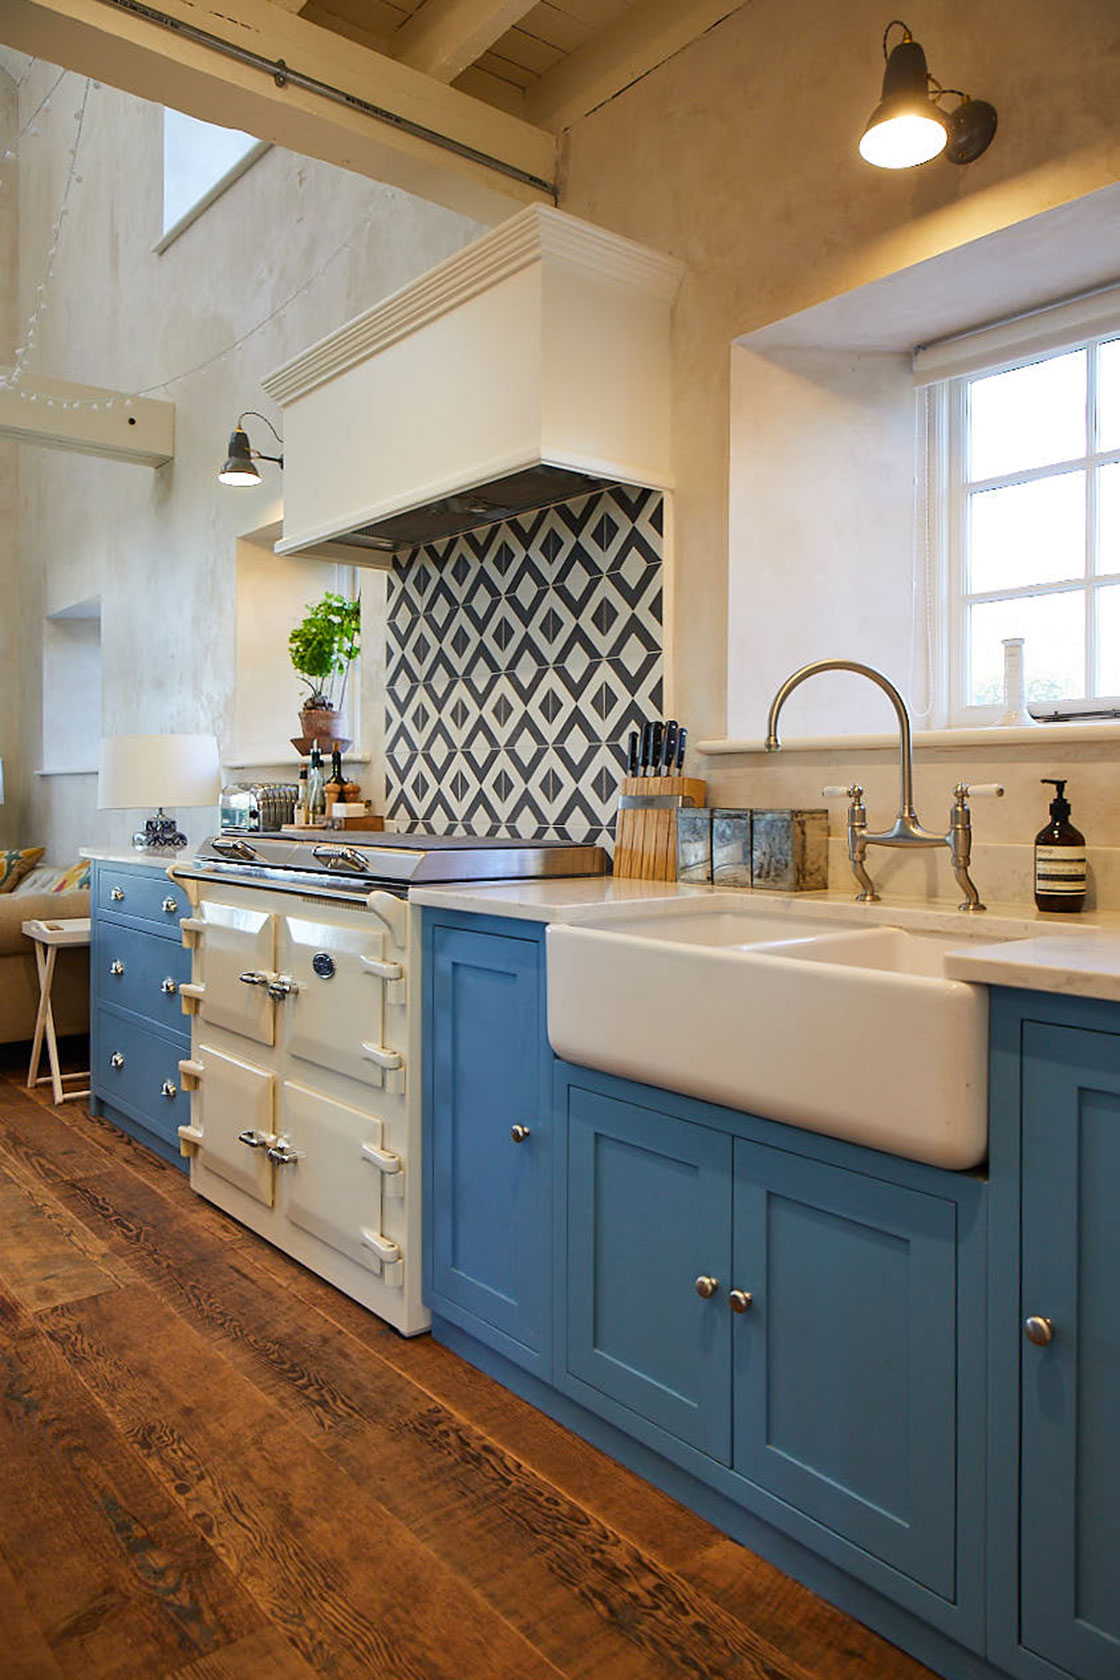 Cream Everhot cooker next to light blue kitchen cabinets and ceramic white double Belfast sink